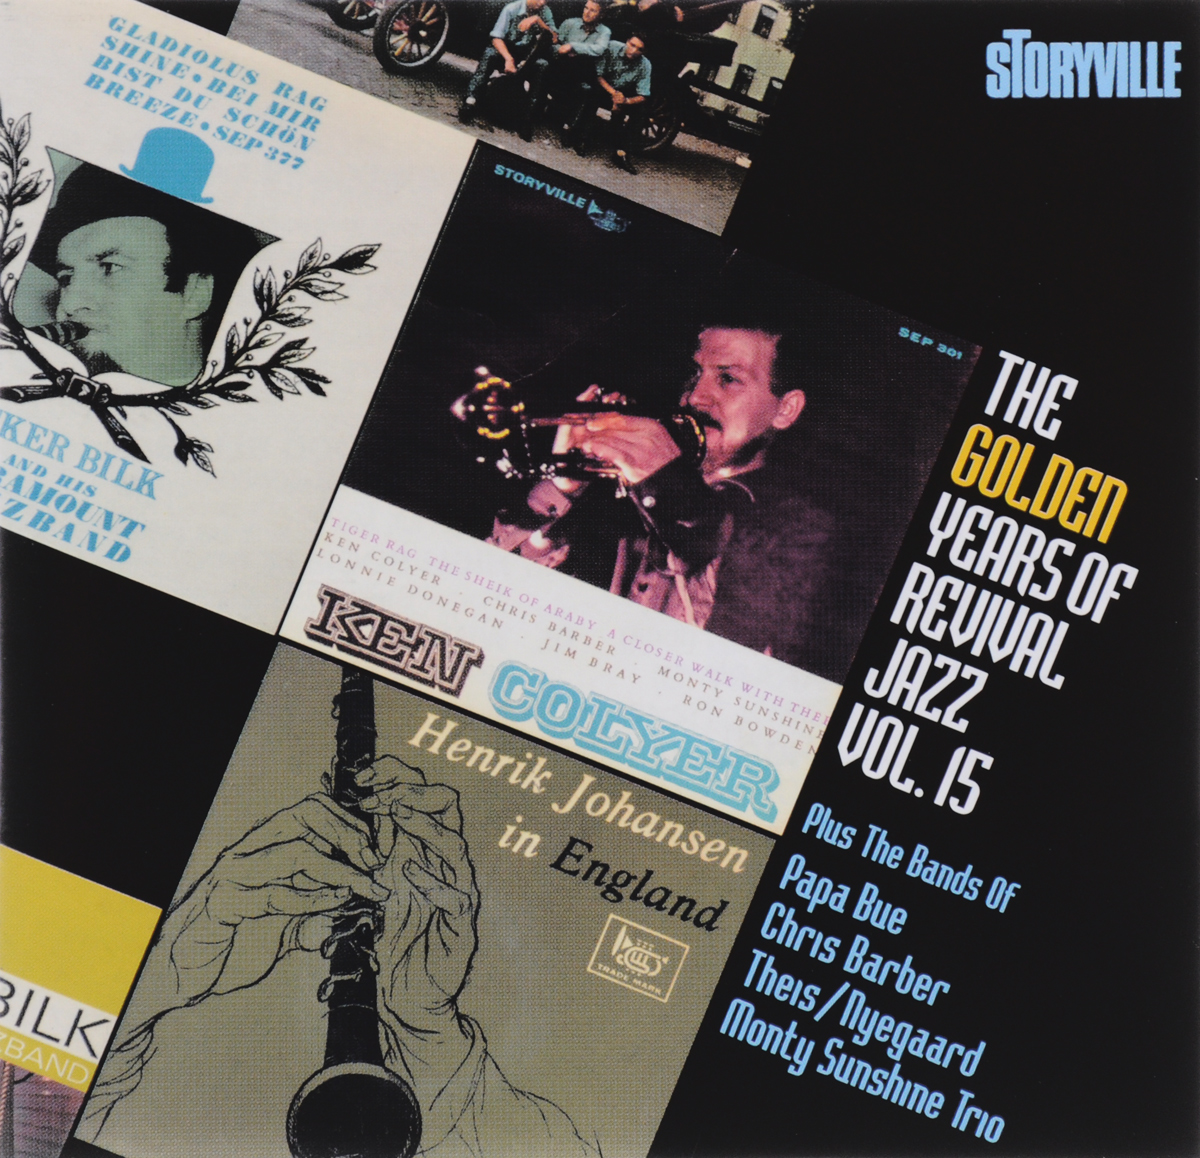 The Golden Years Of Revival Jazz. Vol.15